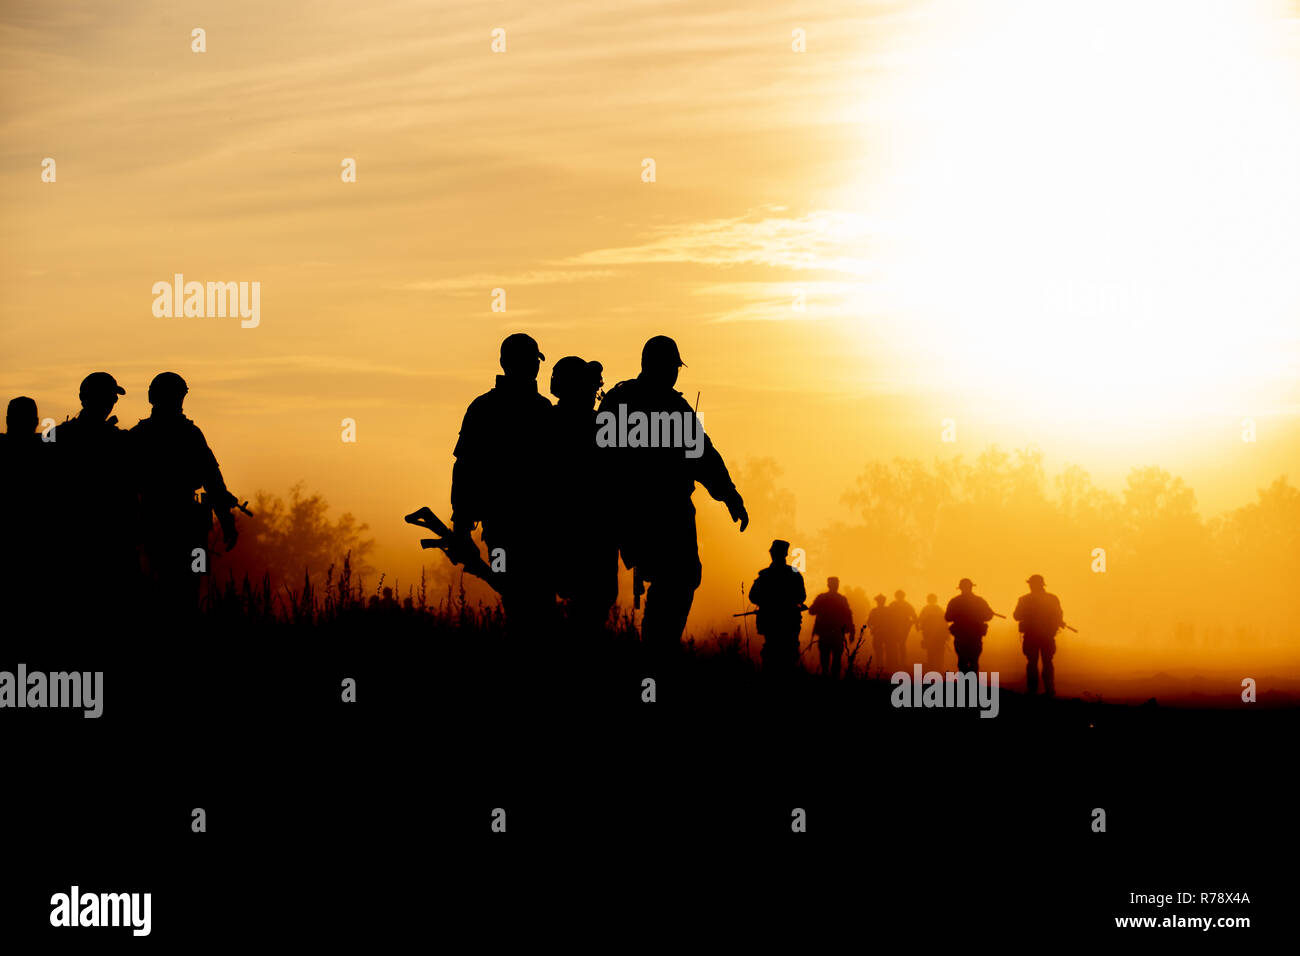 silhouette action soldiers walking hold weapons the background is smoke and sunset and white balance ship effect dark art style Stock Photo